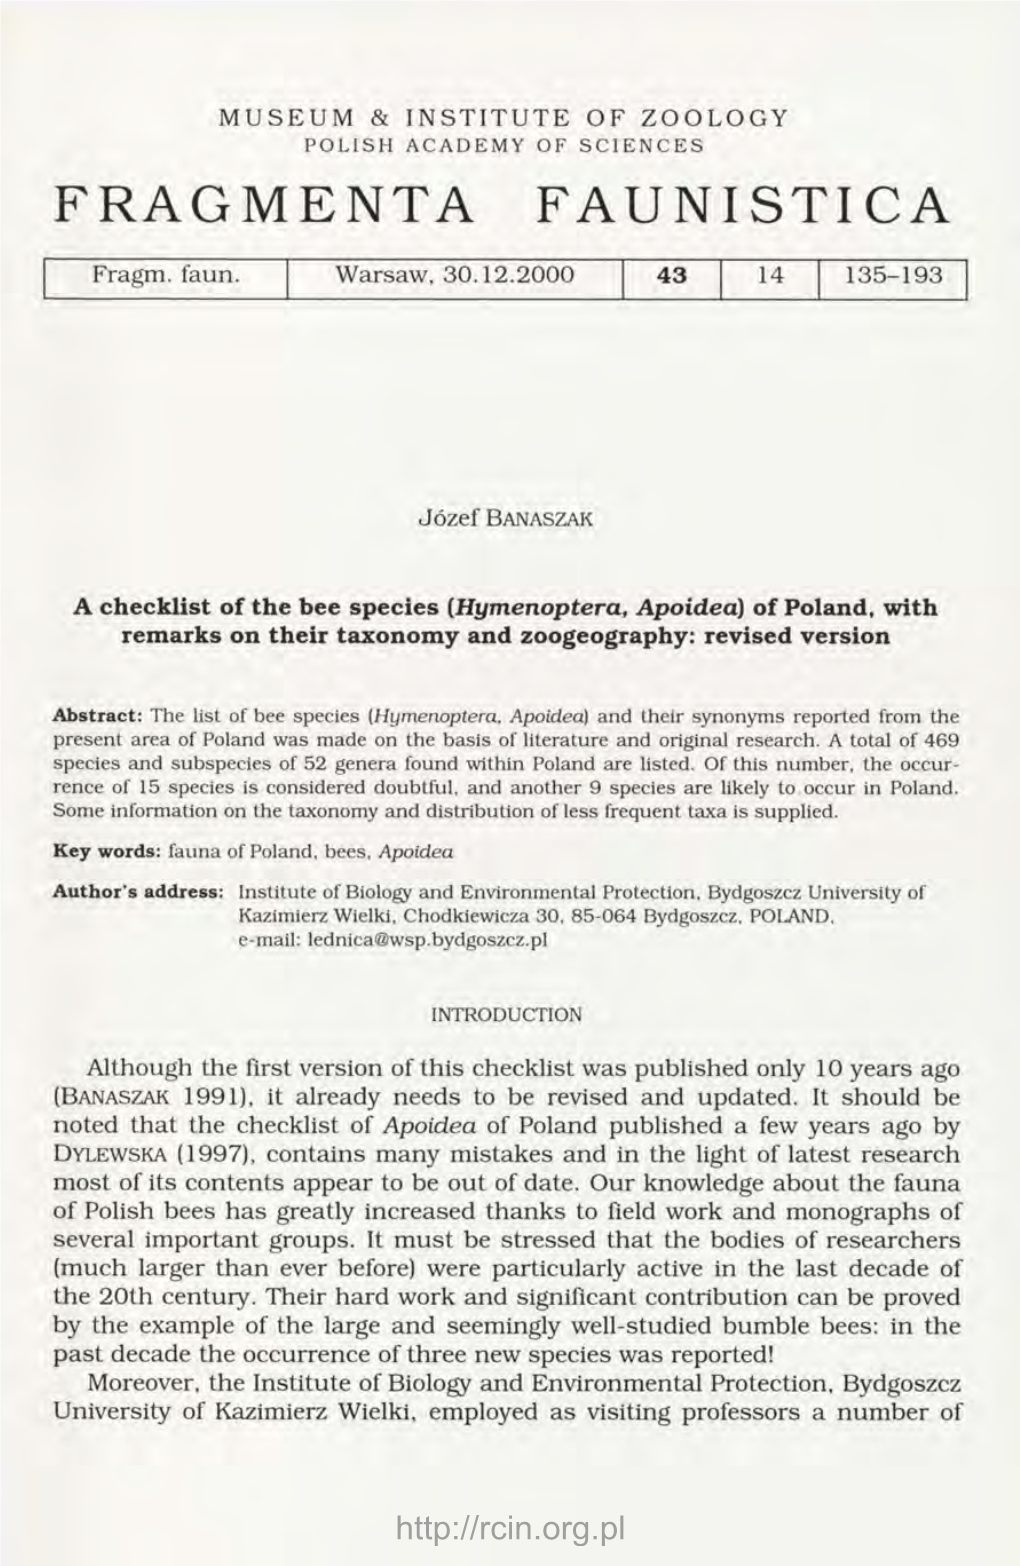 A Checklist of the Bee Species (Hymenoptera, Apoidea) of Poland, with Remarks on Their Taxonomy and Zoogeography: Revised Versio